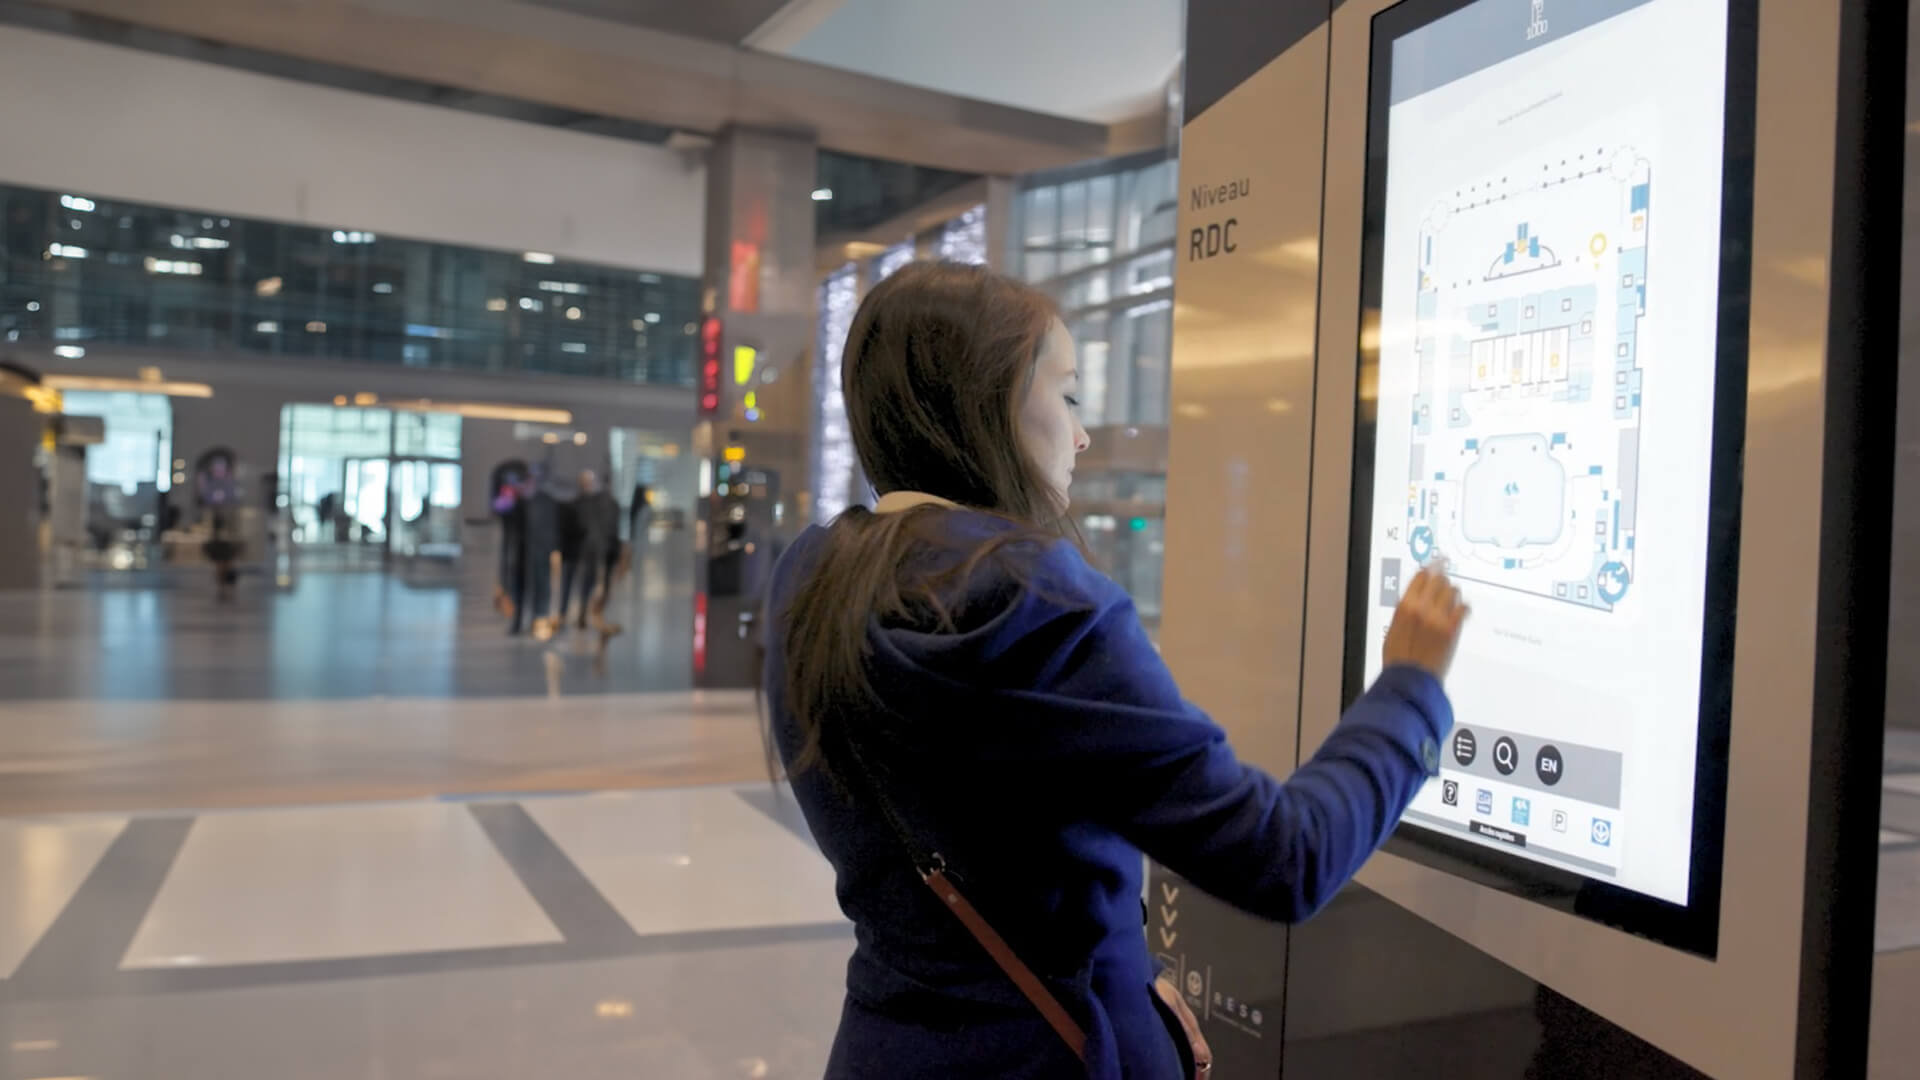 Improved user experience with Interactive digital wayfinding.